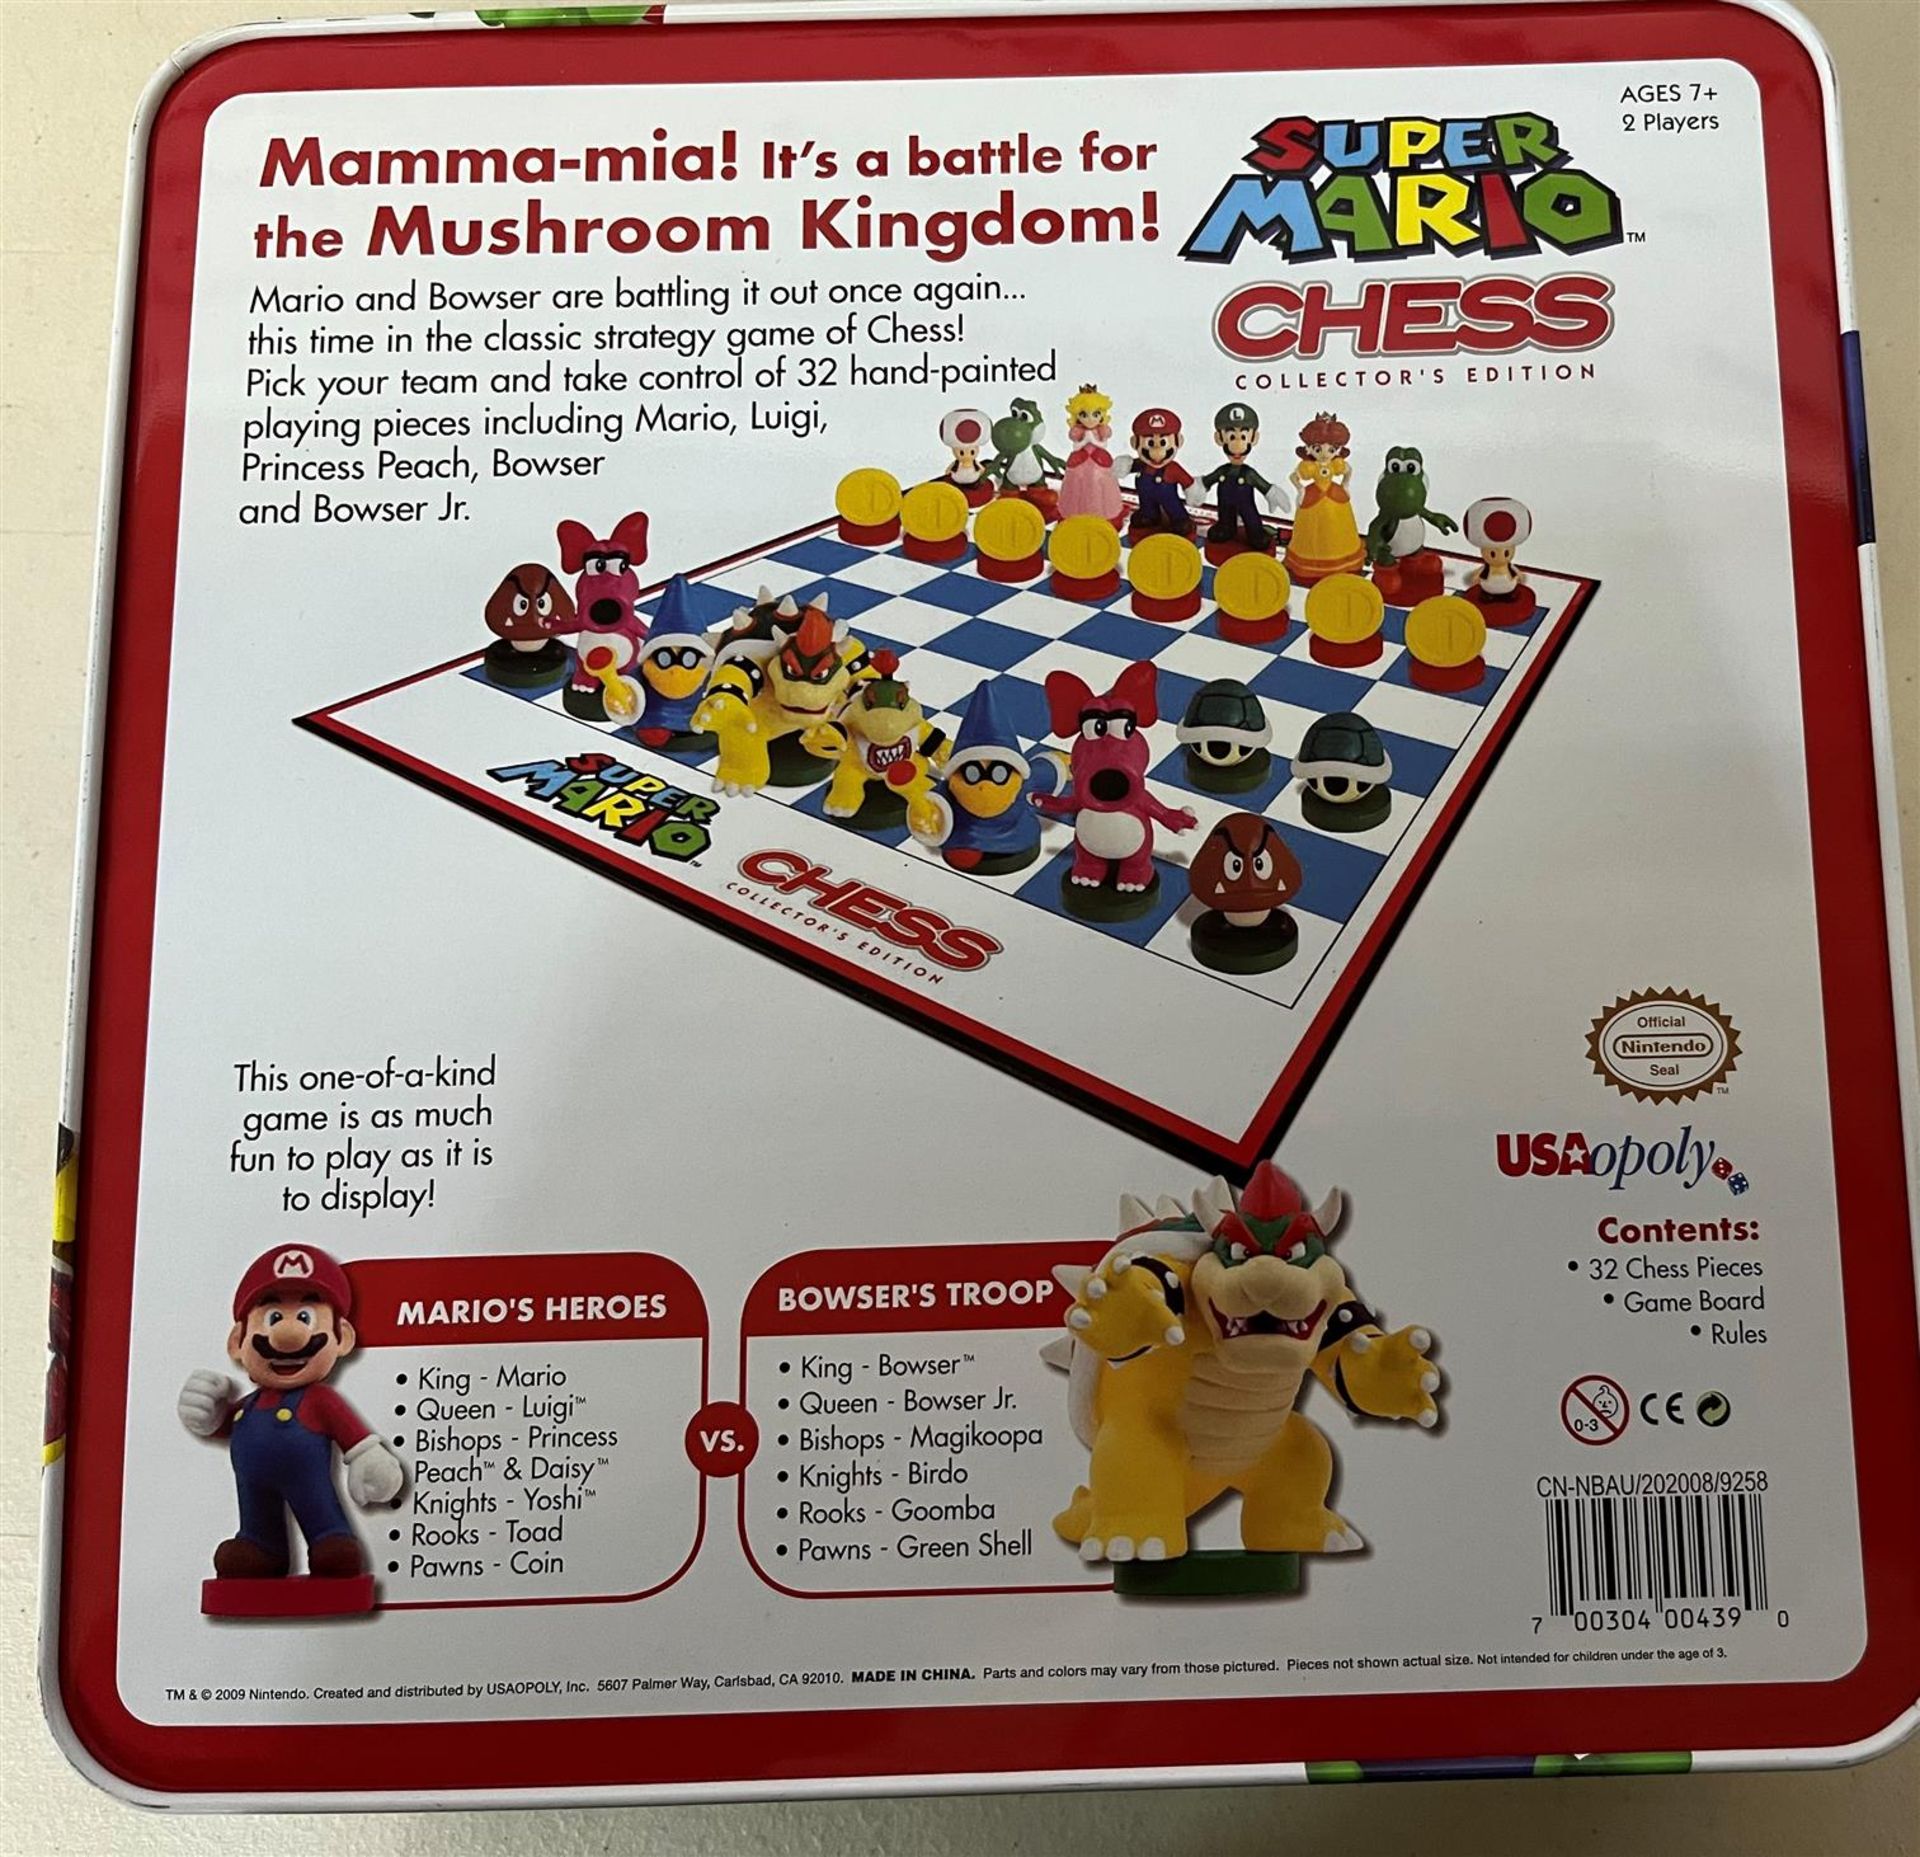 Super Mario Chess Collecter's Eddition - Image 2 of 2